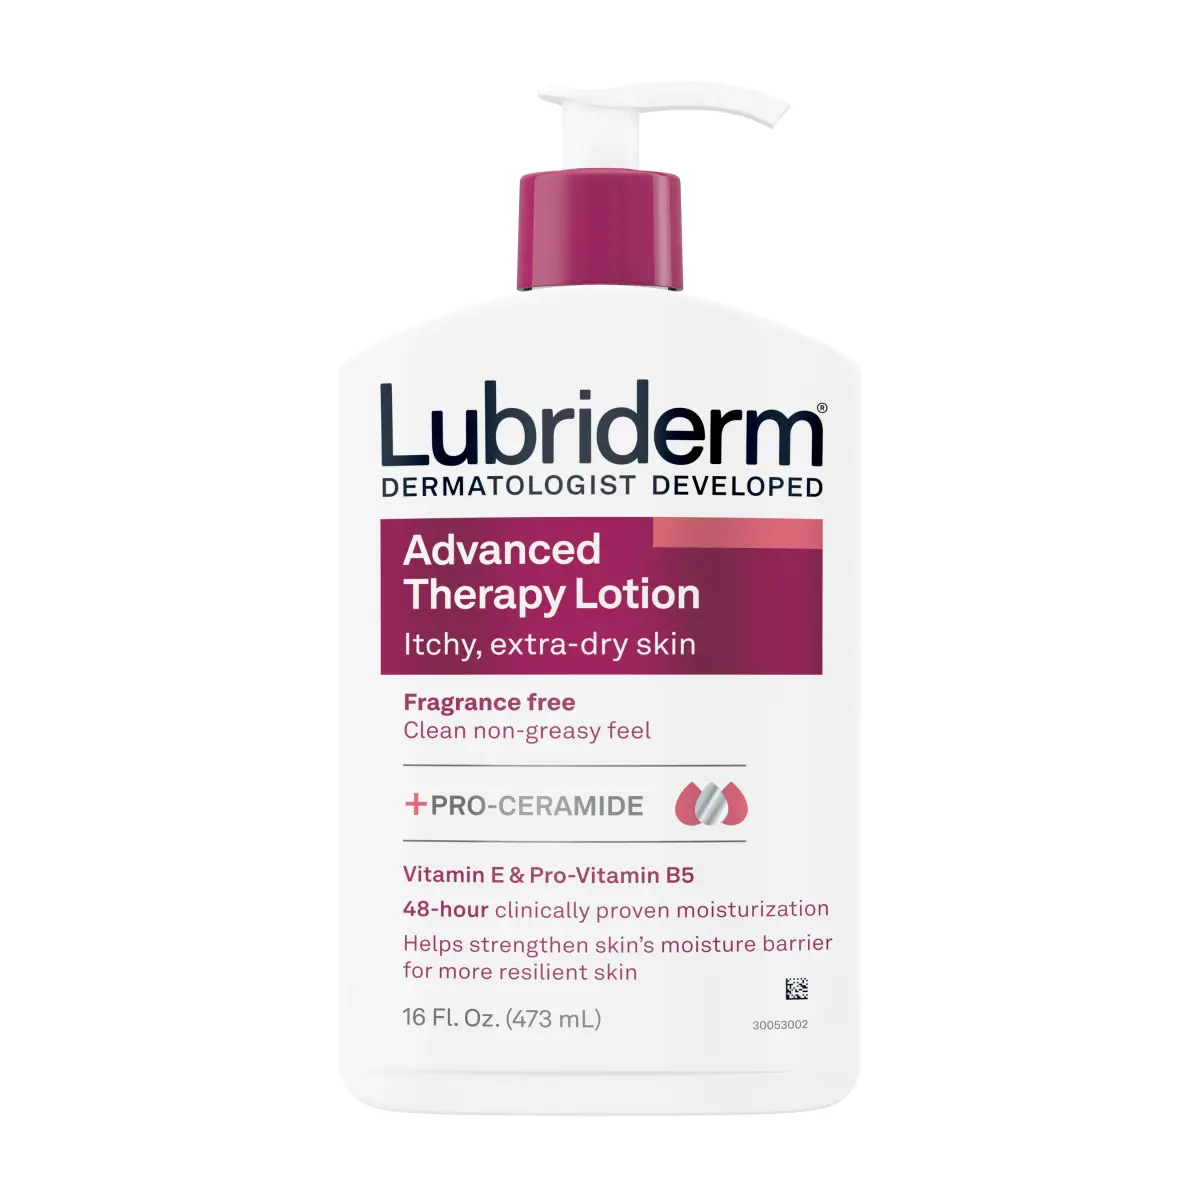 Advanced Therapy Lotion Fragrance-Free image 1